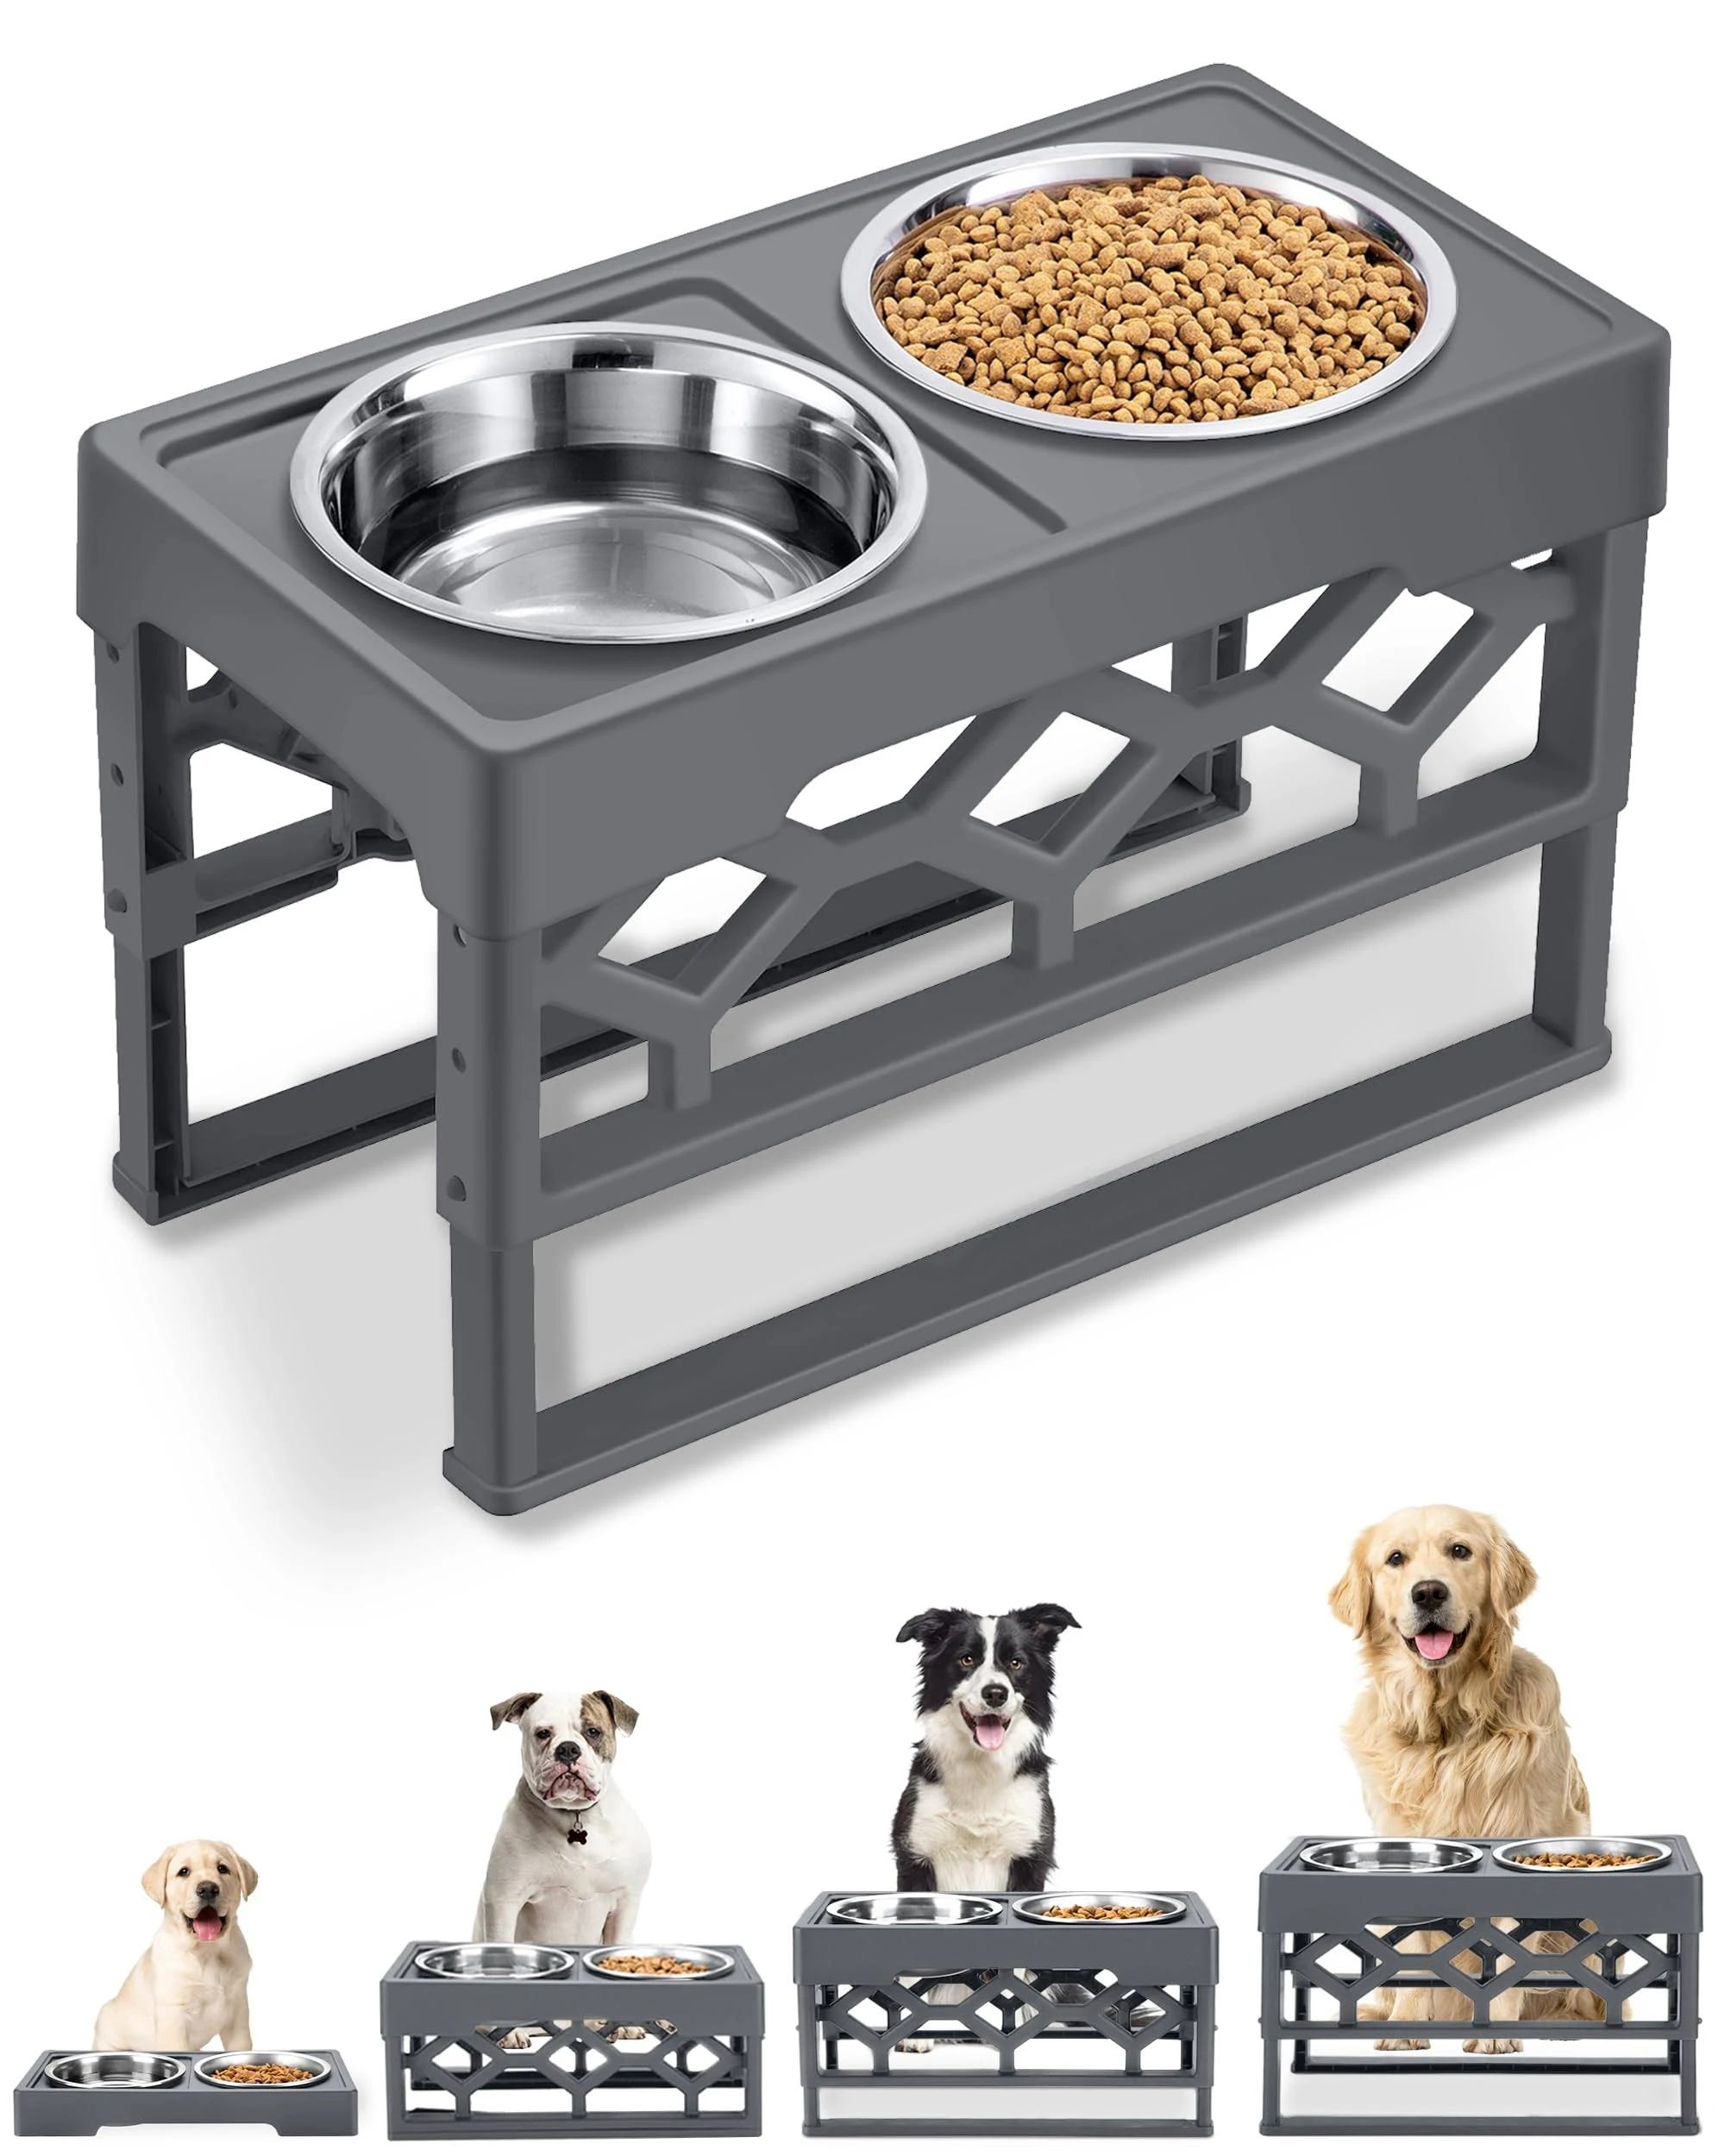 Large Elevated Dog Bowl Stand for Comfort and Digestion | Image